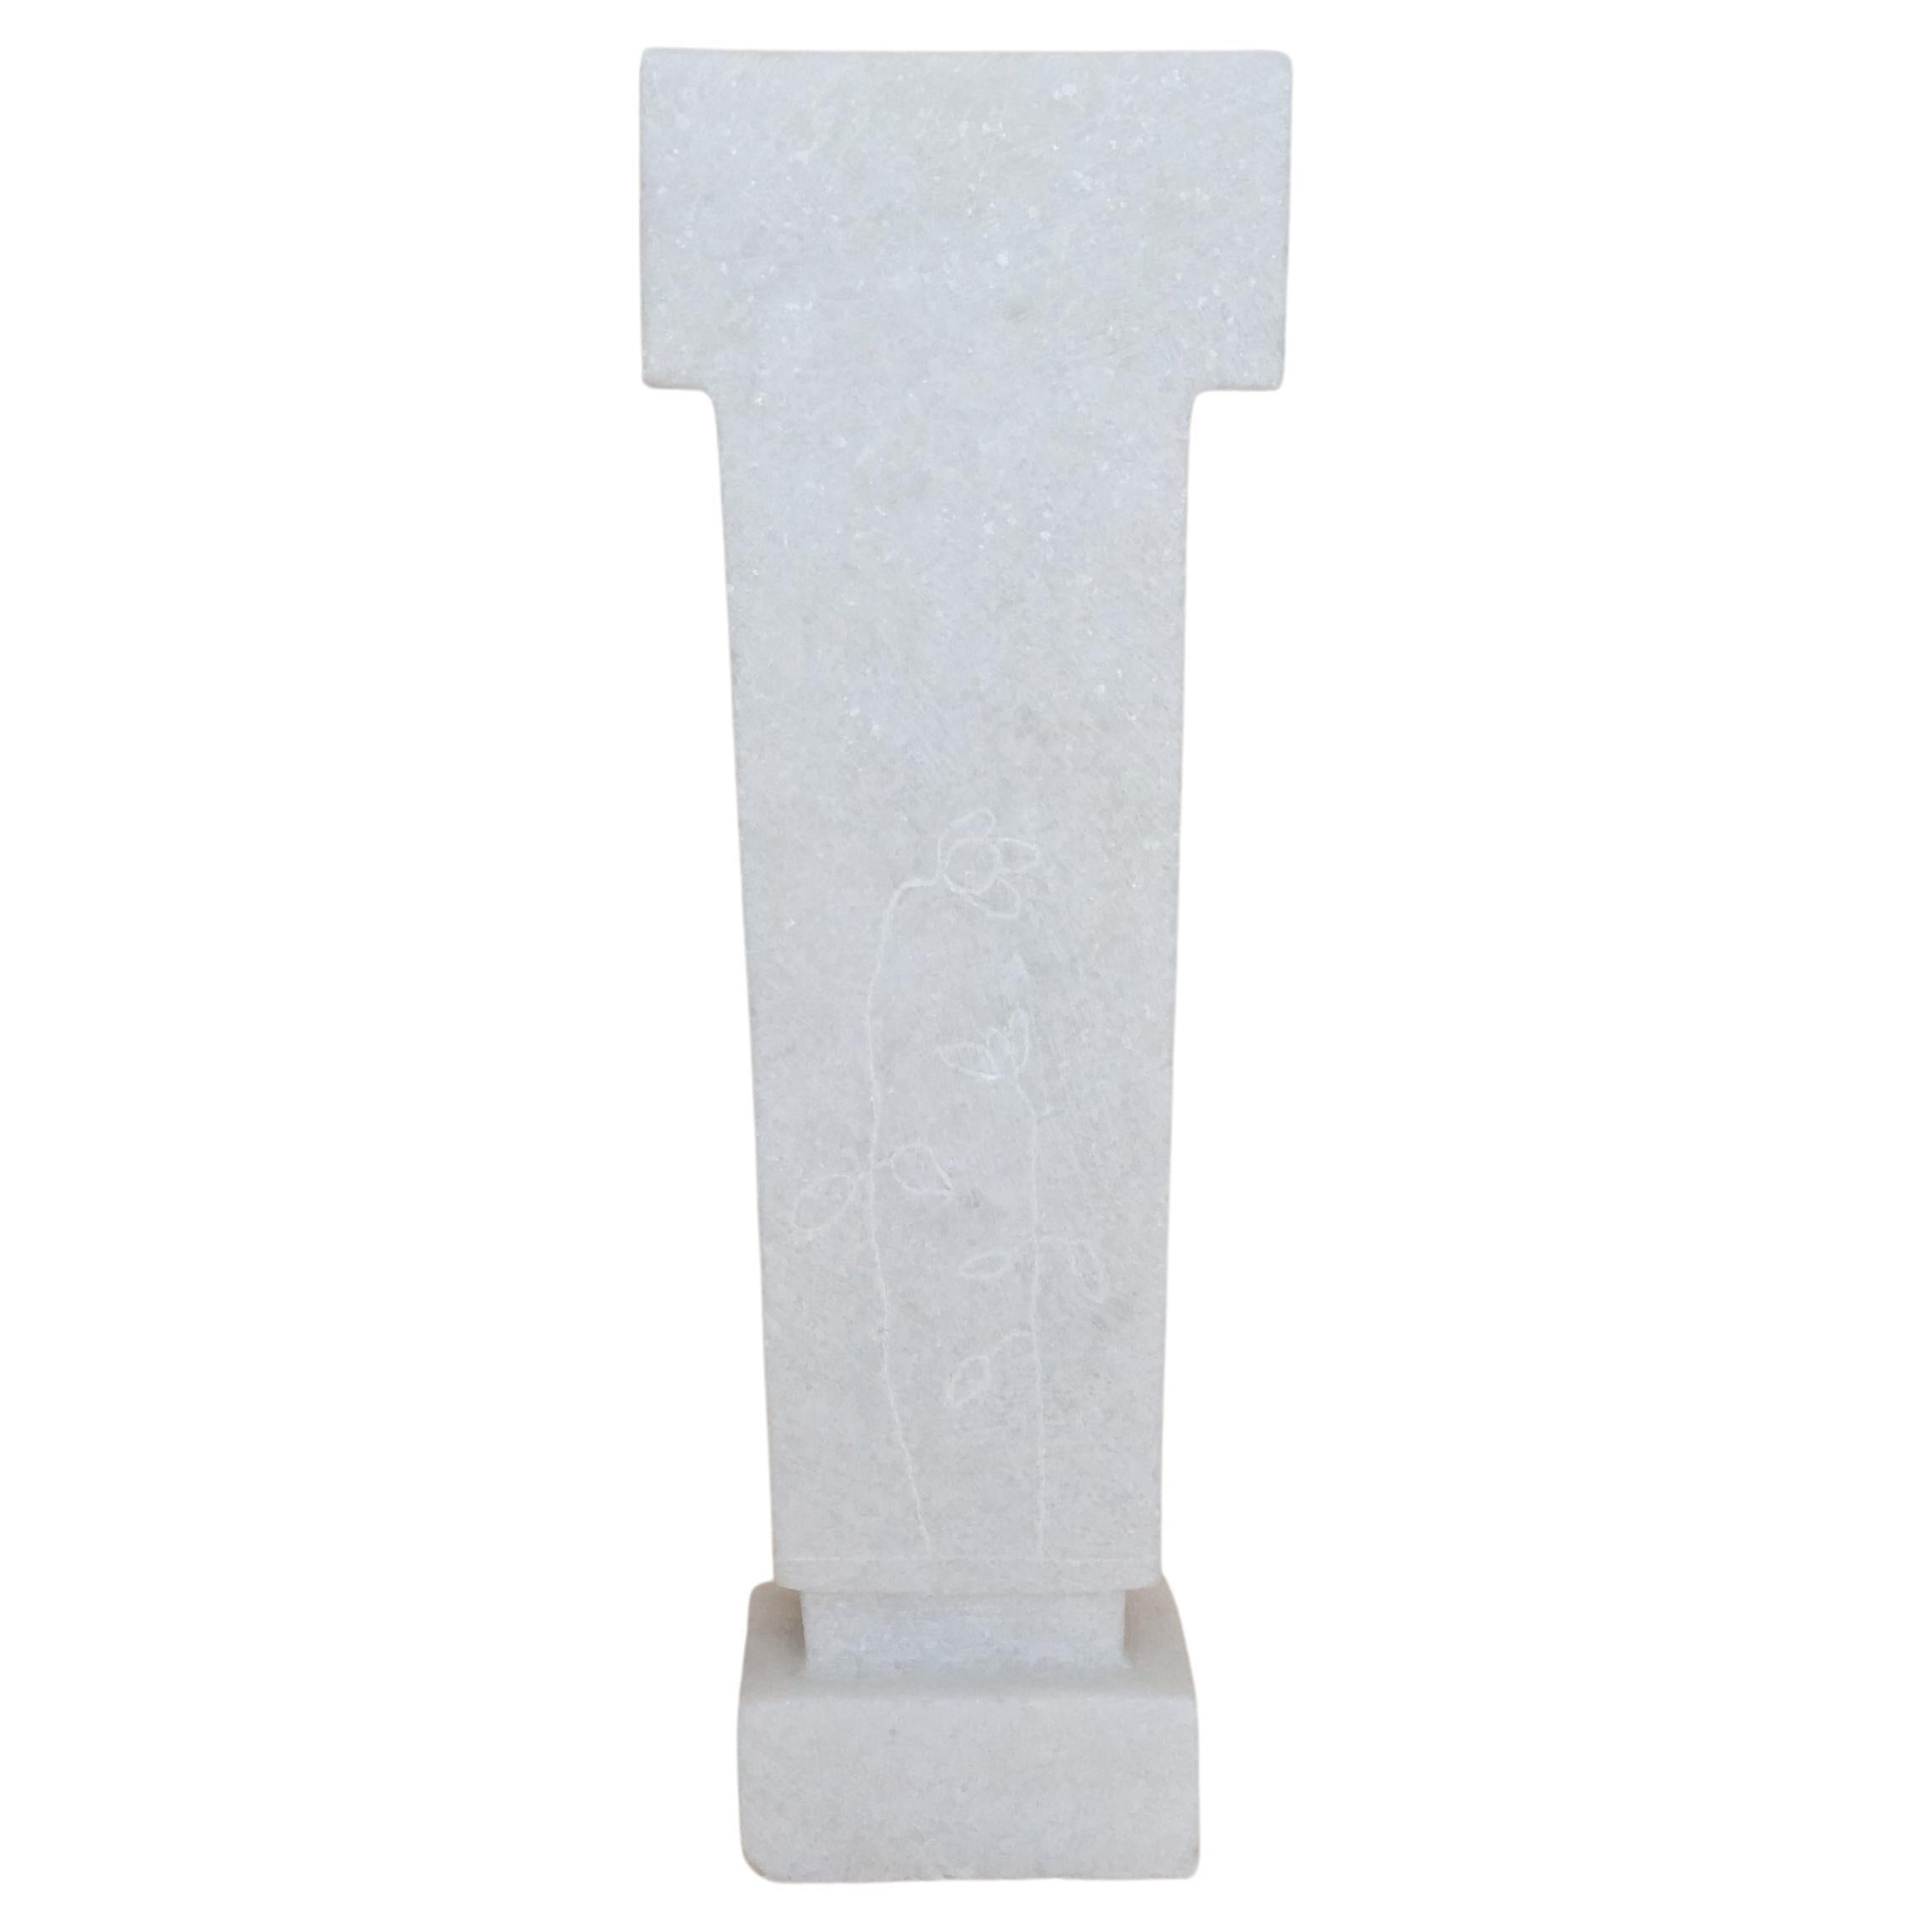 Early Figure, Marble Sculpture by Tom von Kaenel For Sale at 1stDibs